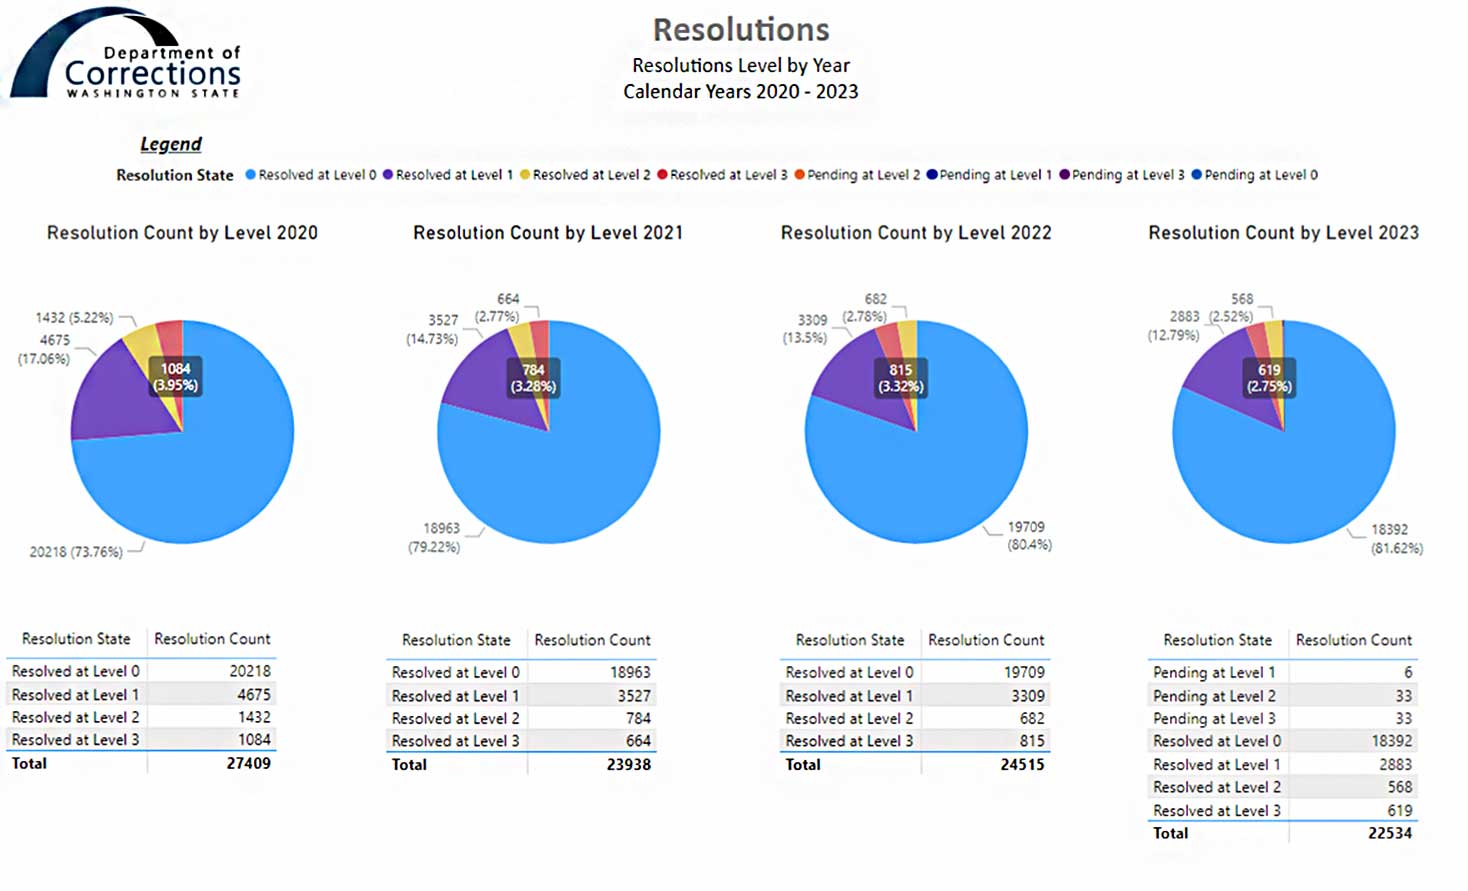 Graph 1 - Pie chart showing Resolution Request Data From 2019 though 2022